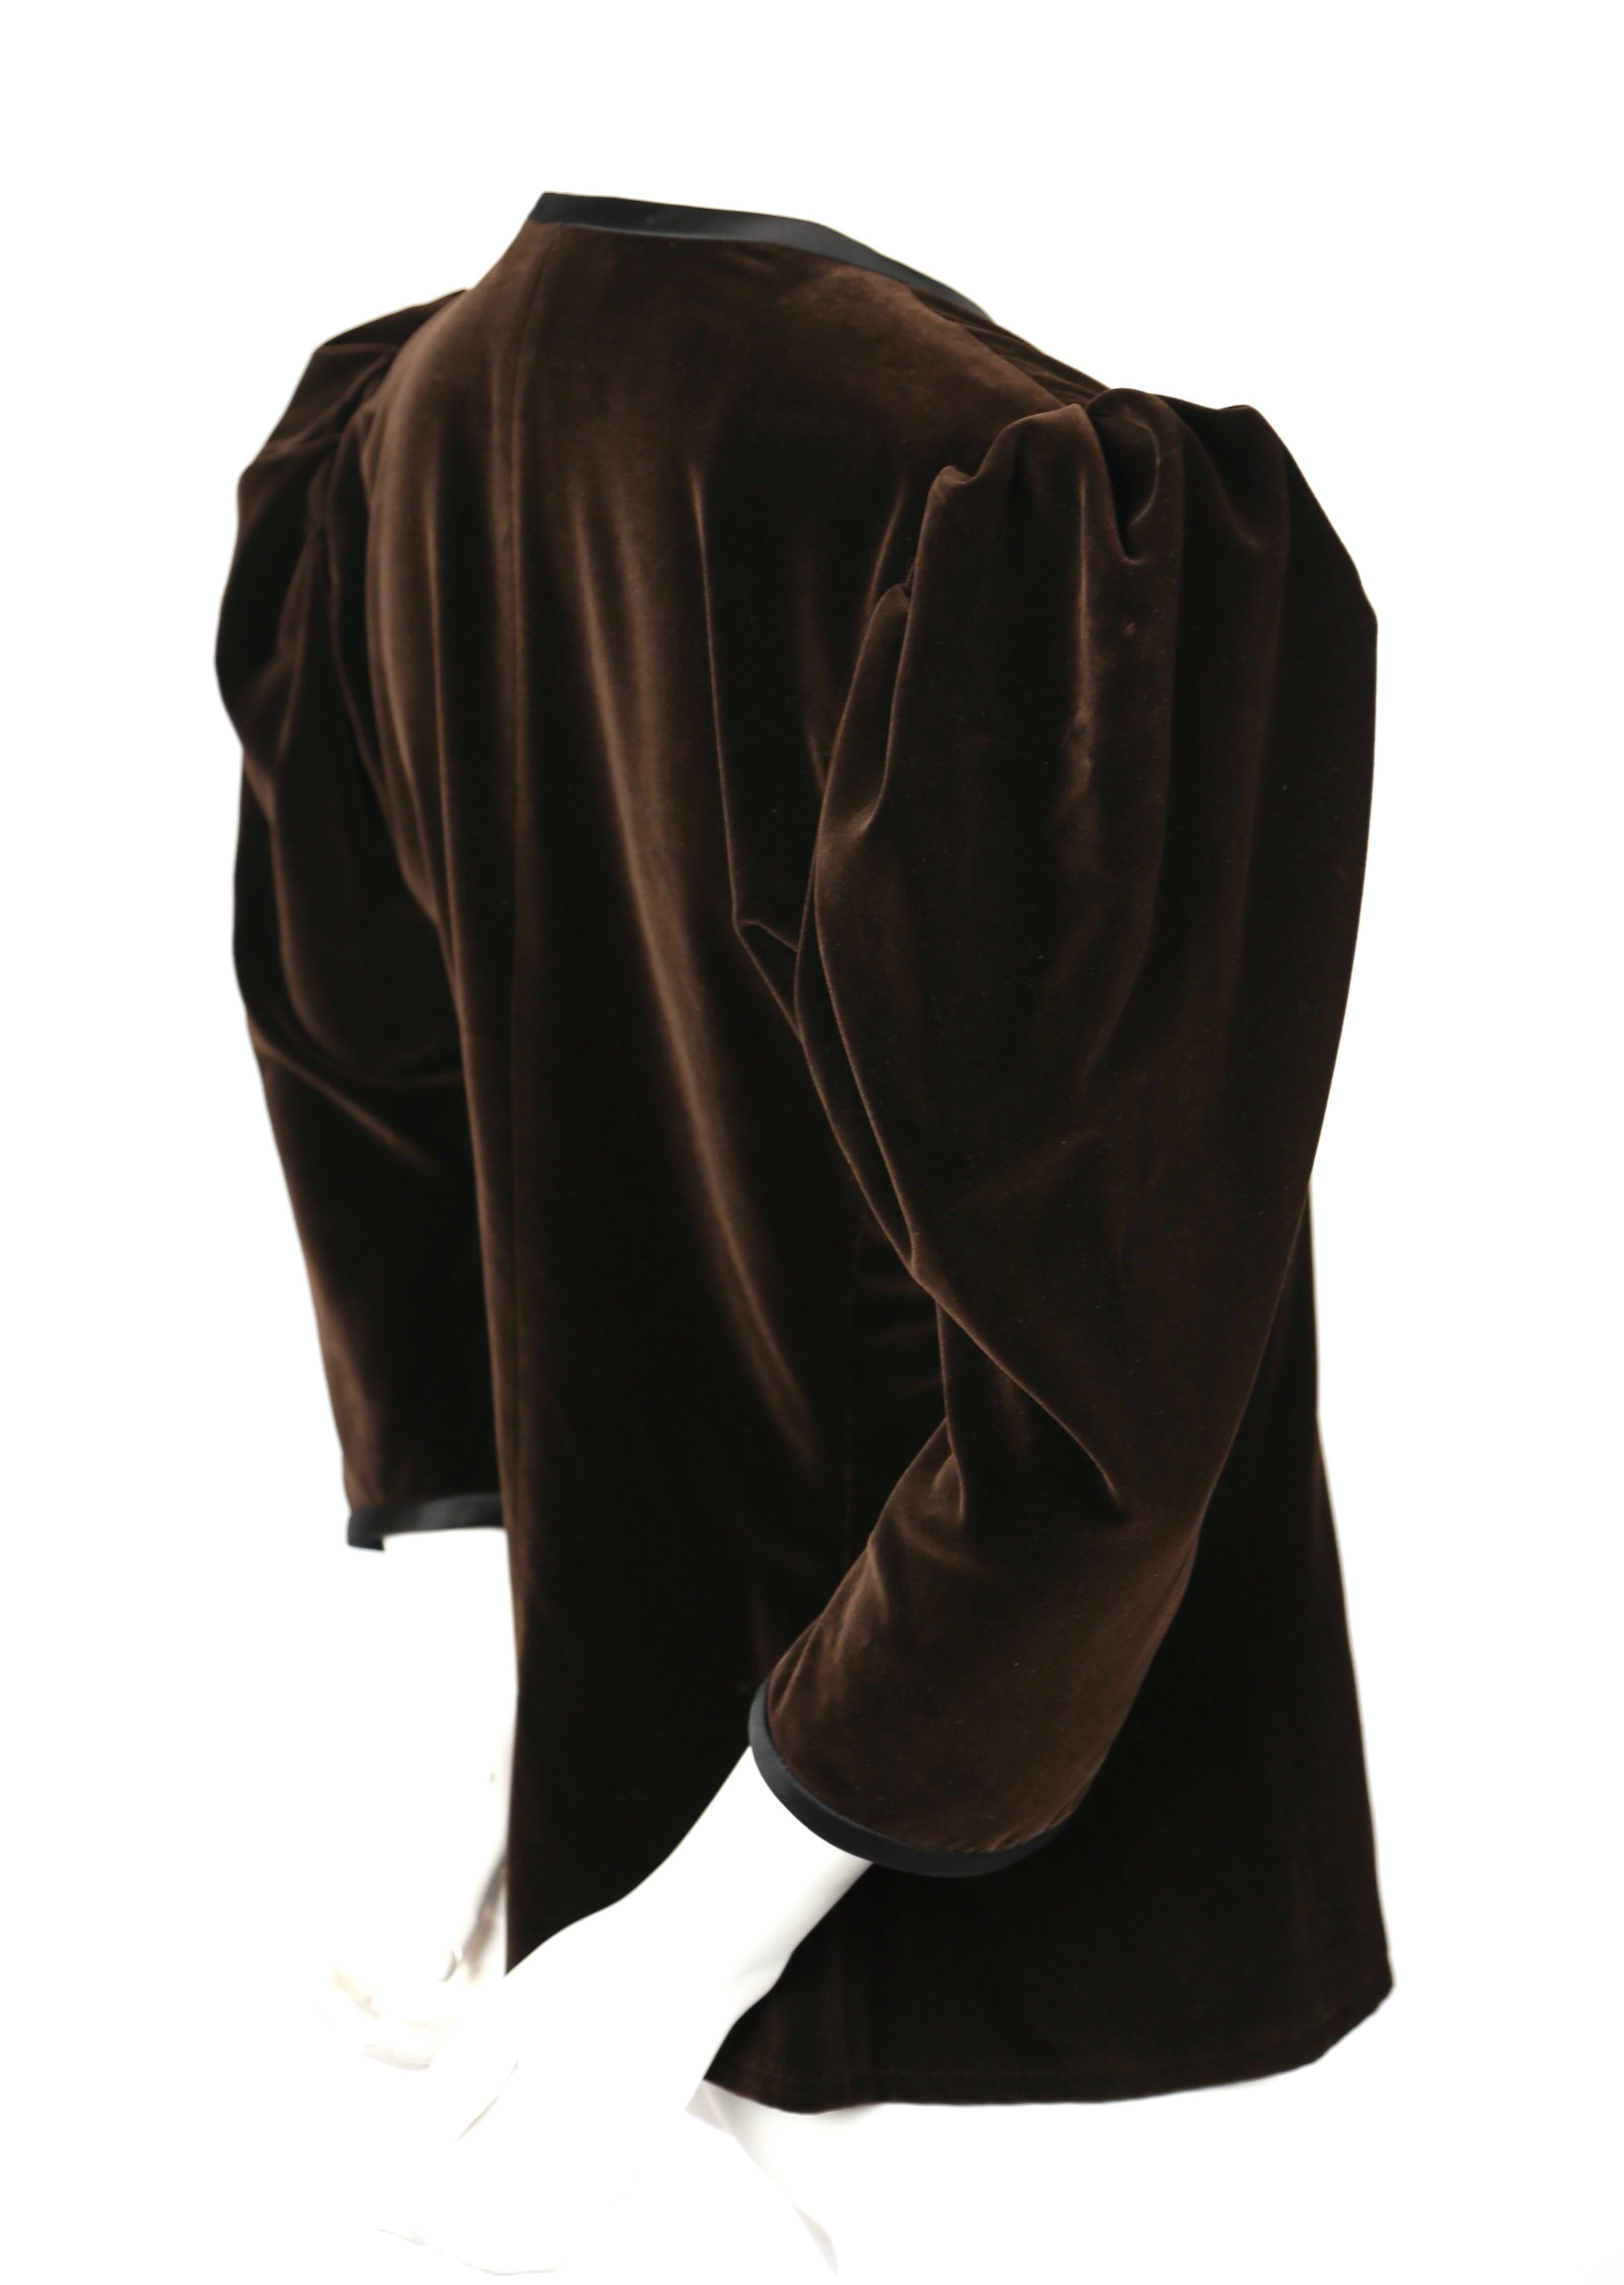 Chocolate brown velvet jacket with black satin trim from Yves Saint Laurent dating to the 1970's. No size is indicated however it best fits approximately a US size 6. Approximate measurements: shoulders 15